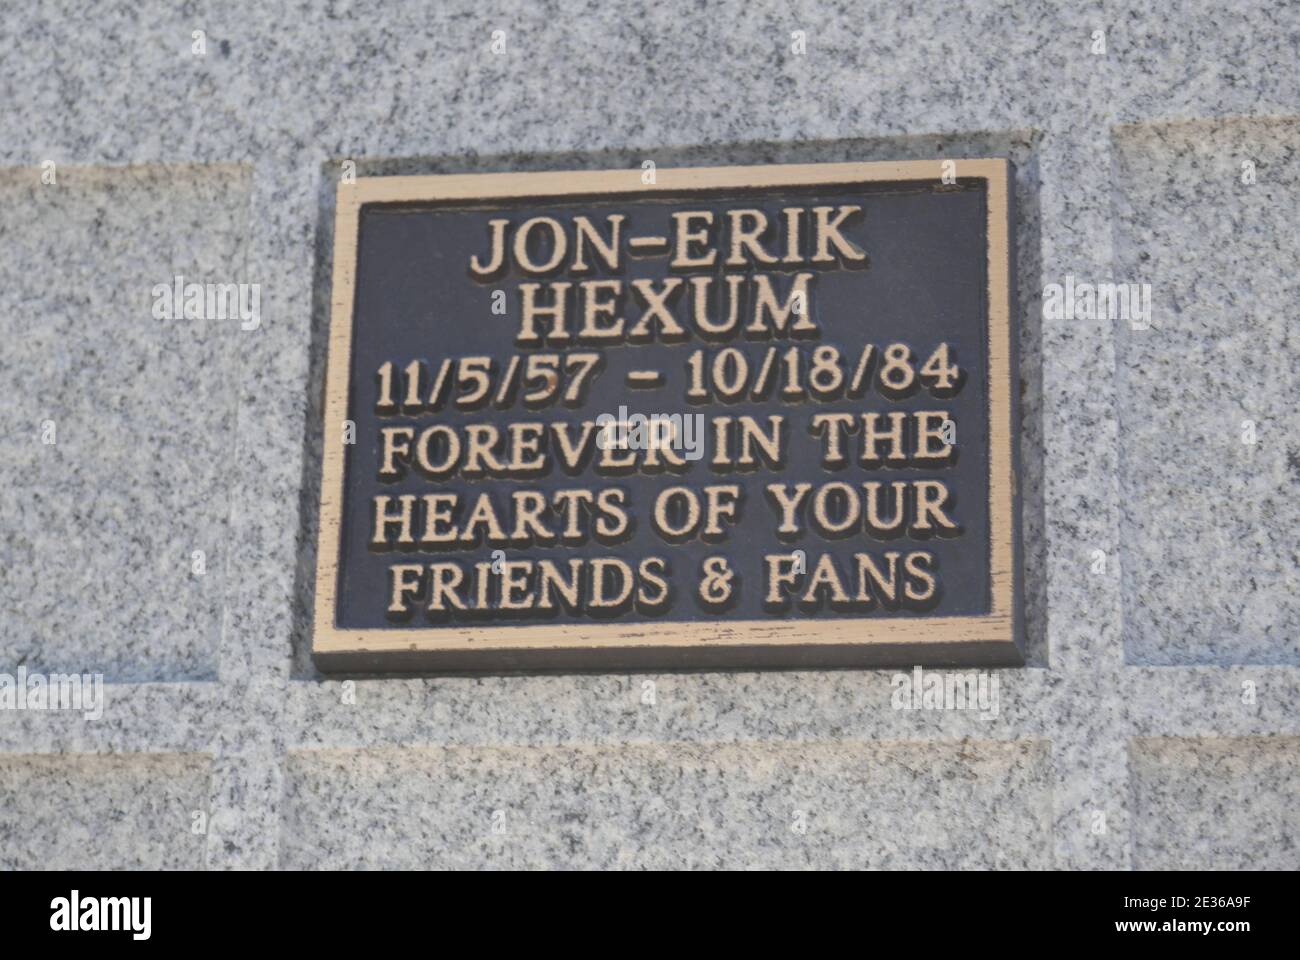 North Hollywood, California, USA 15th January 2021 A general view of atmosphere of Jon-Erik Hexum's Cenotaph and Memorial on January 15, 2021 at Valhalla Memorial Park in North Hollywood, California, USA. Photo by Barry King/Alamy Stock Photo Stock Photo